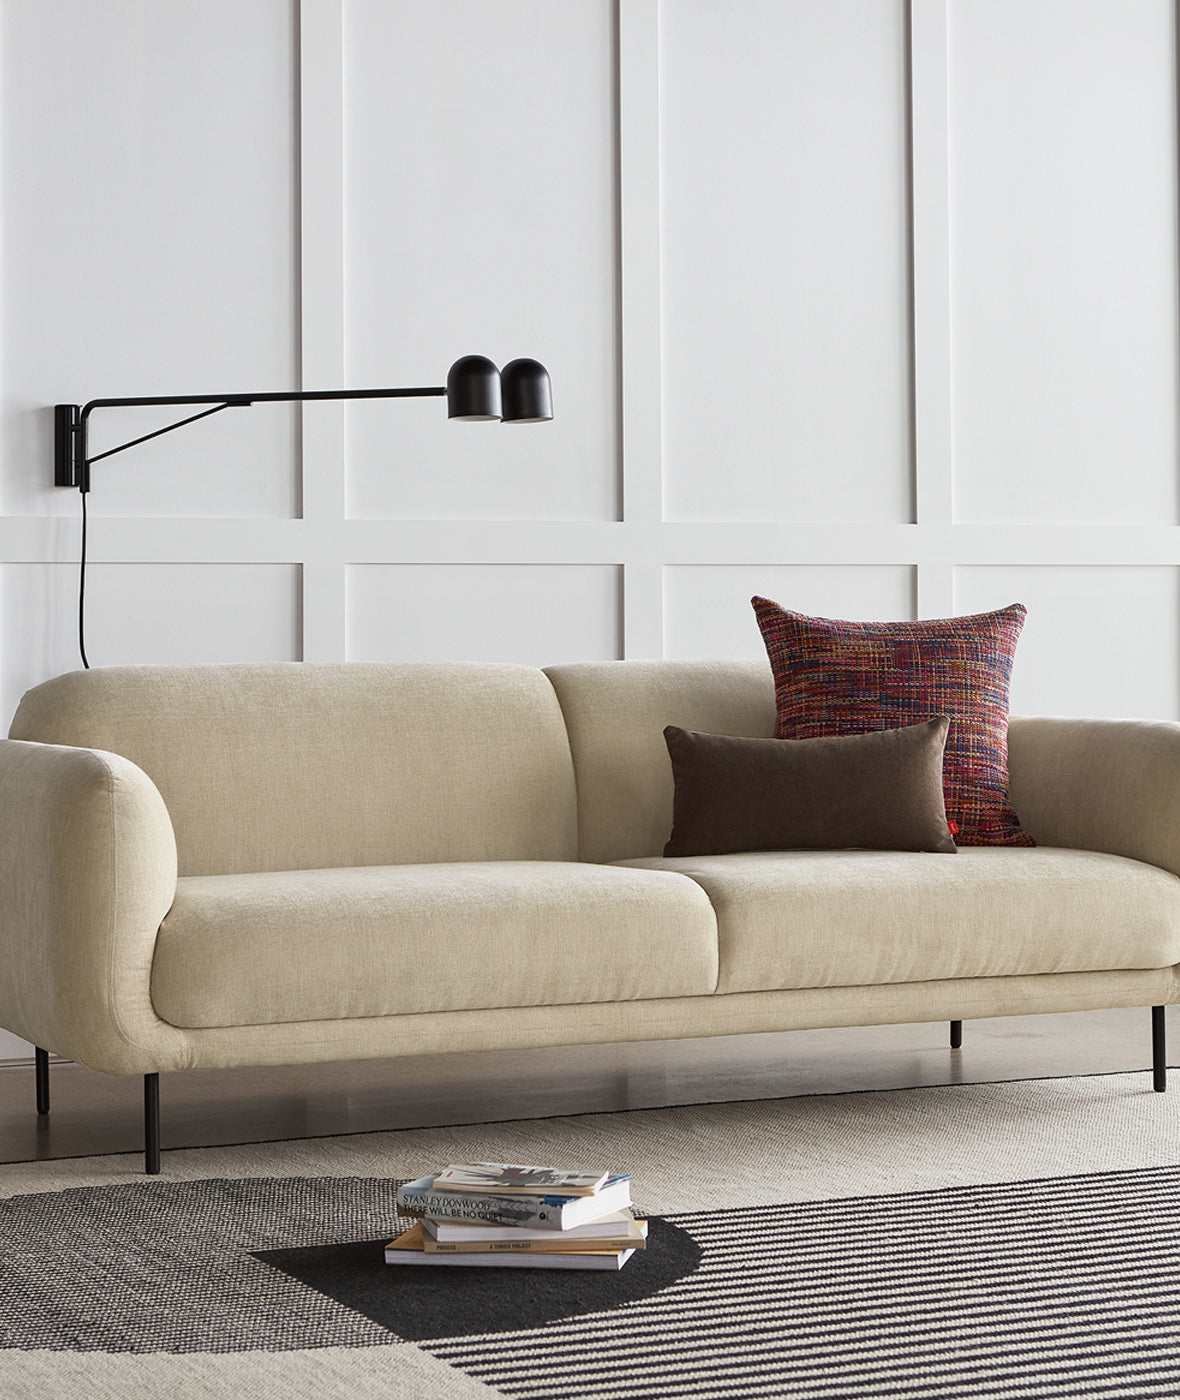 Nord Sofa - More Options